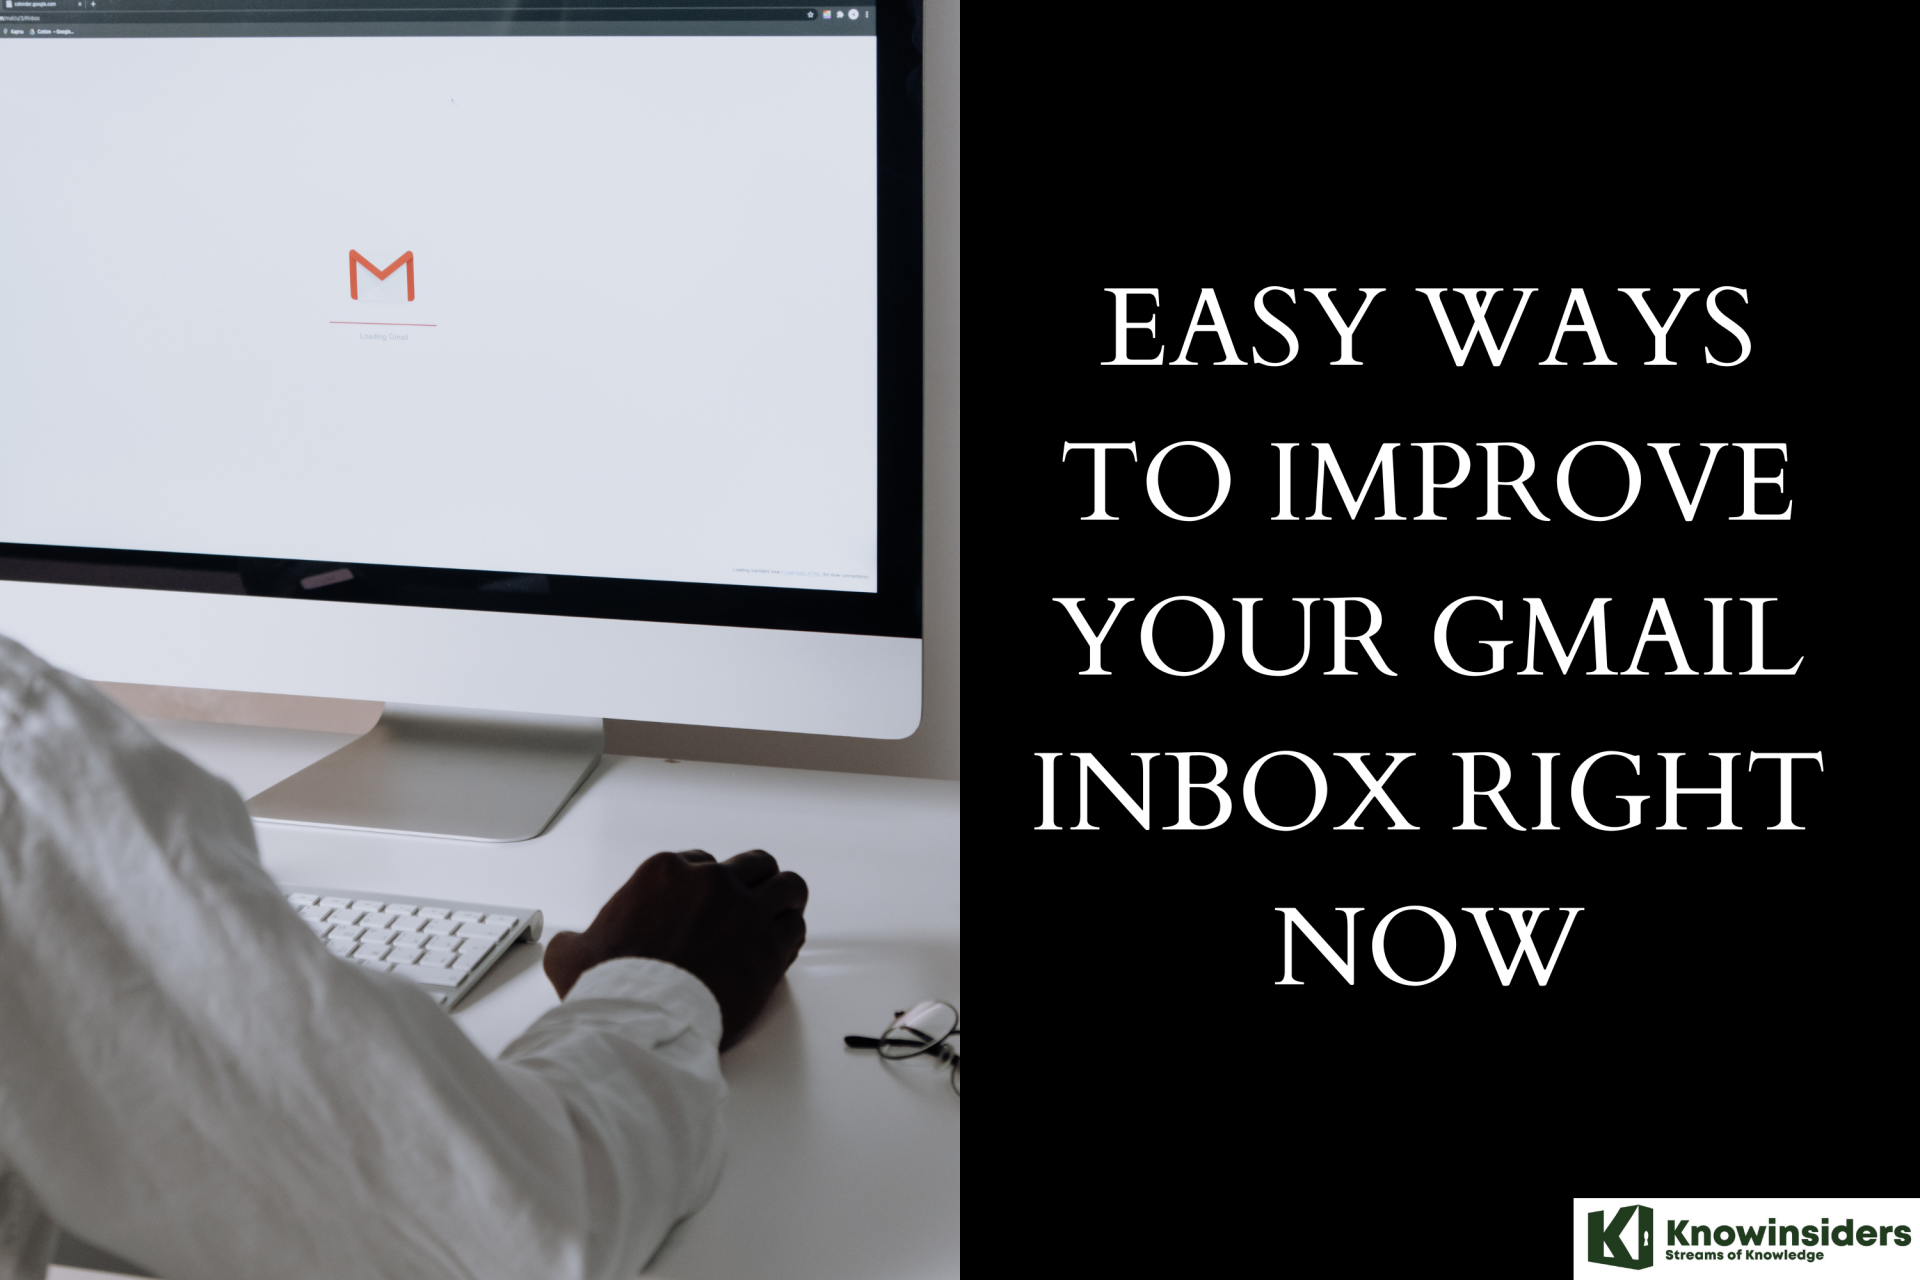 Easy Ways to Improve Your Gmail Inbox Right Now